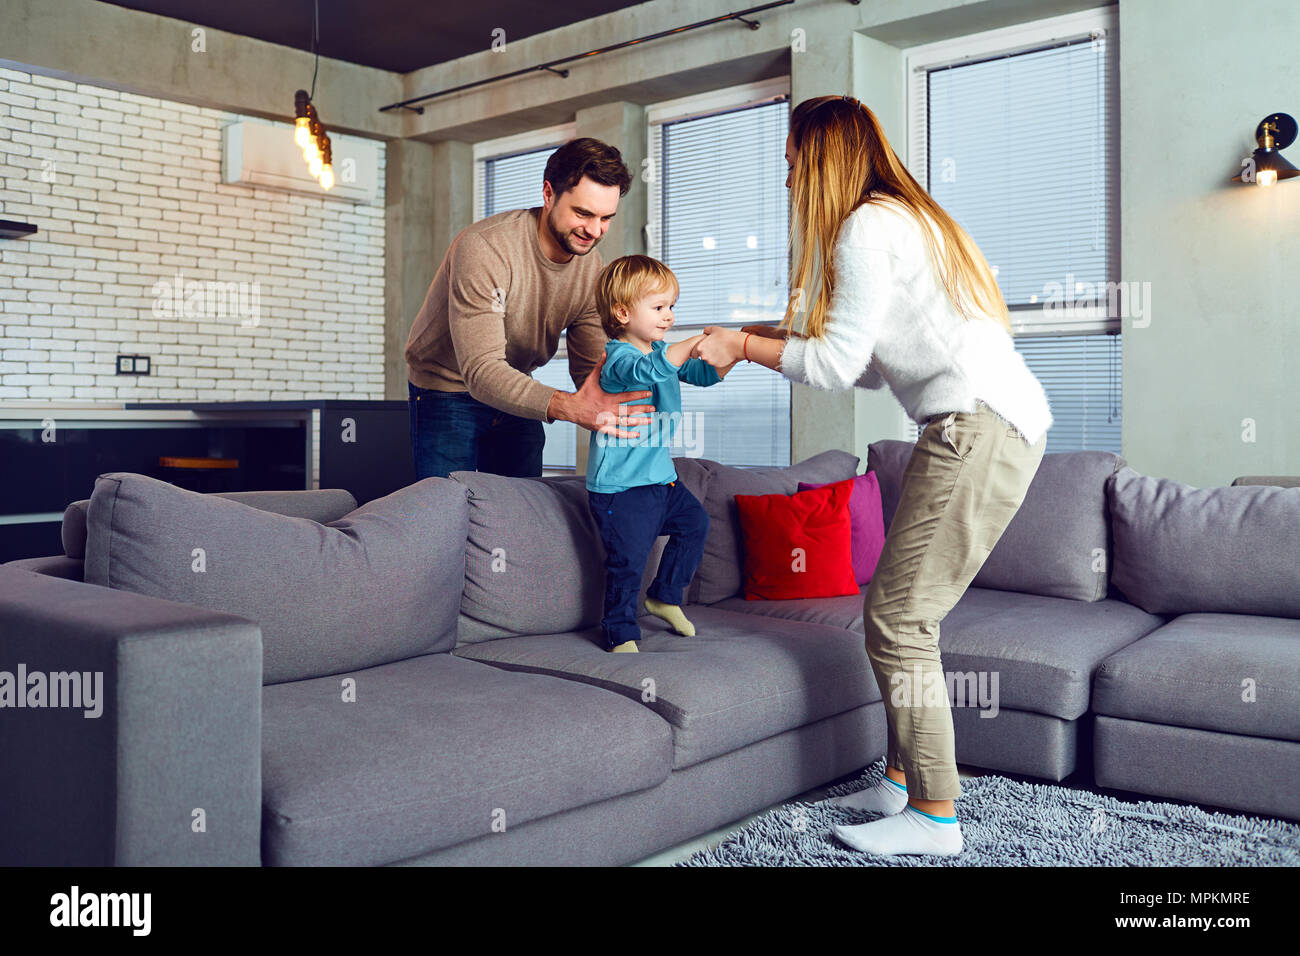 A family is playing with a child in the room. Stock Photo